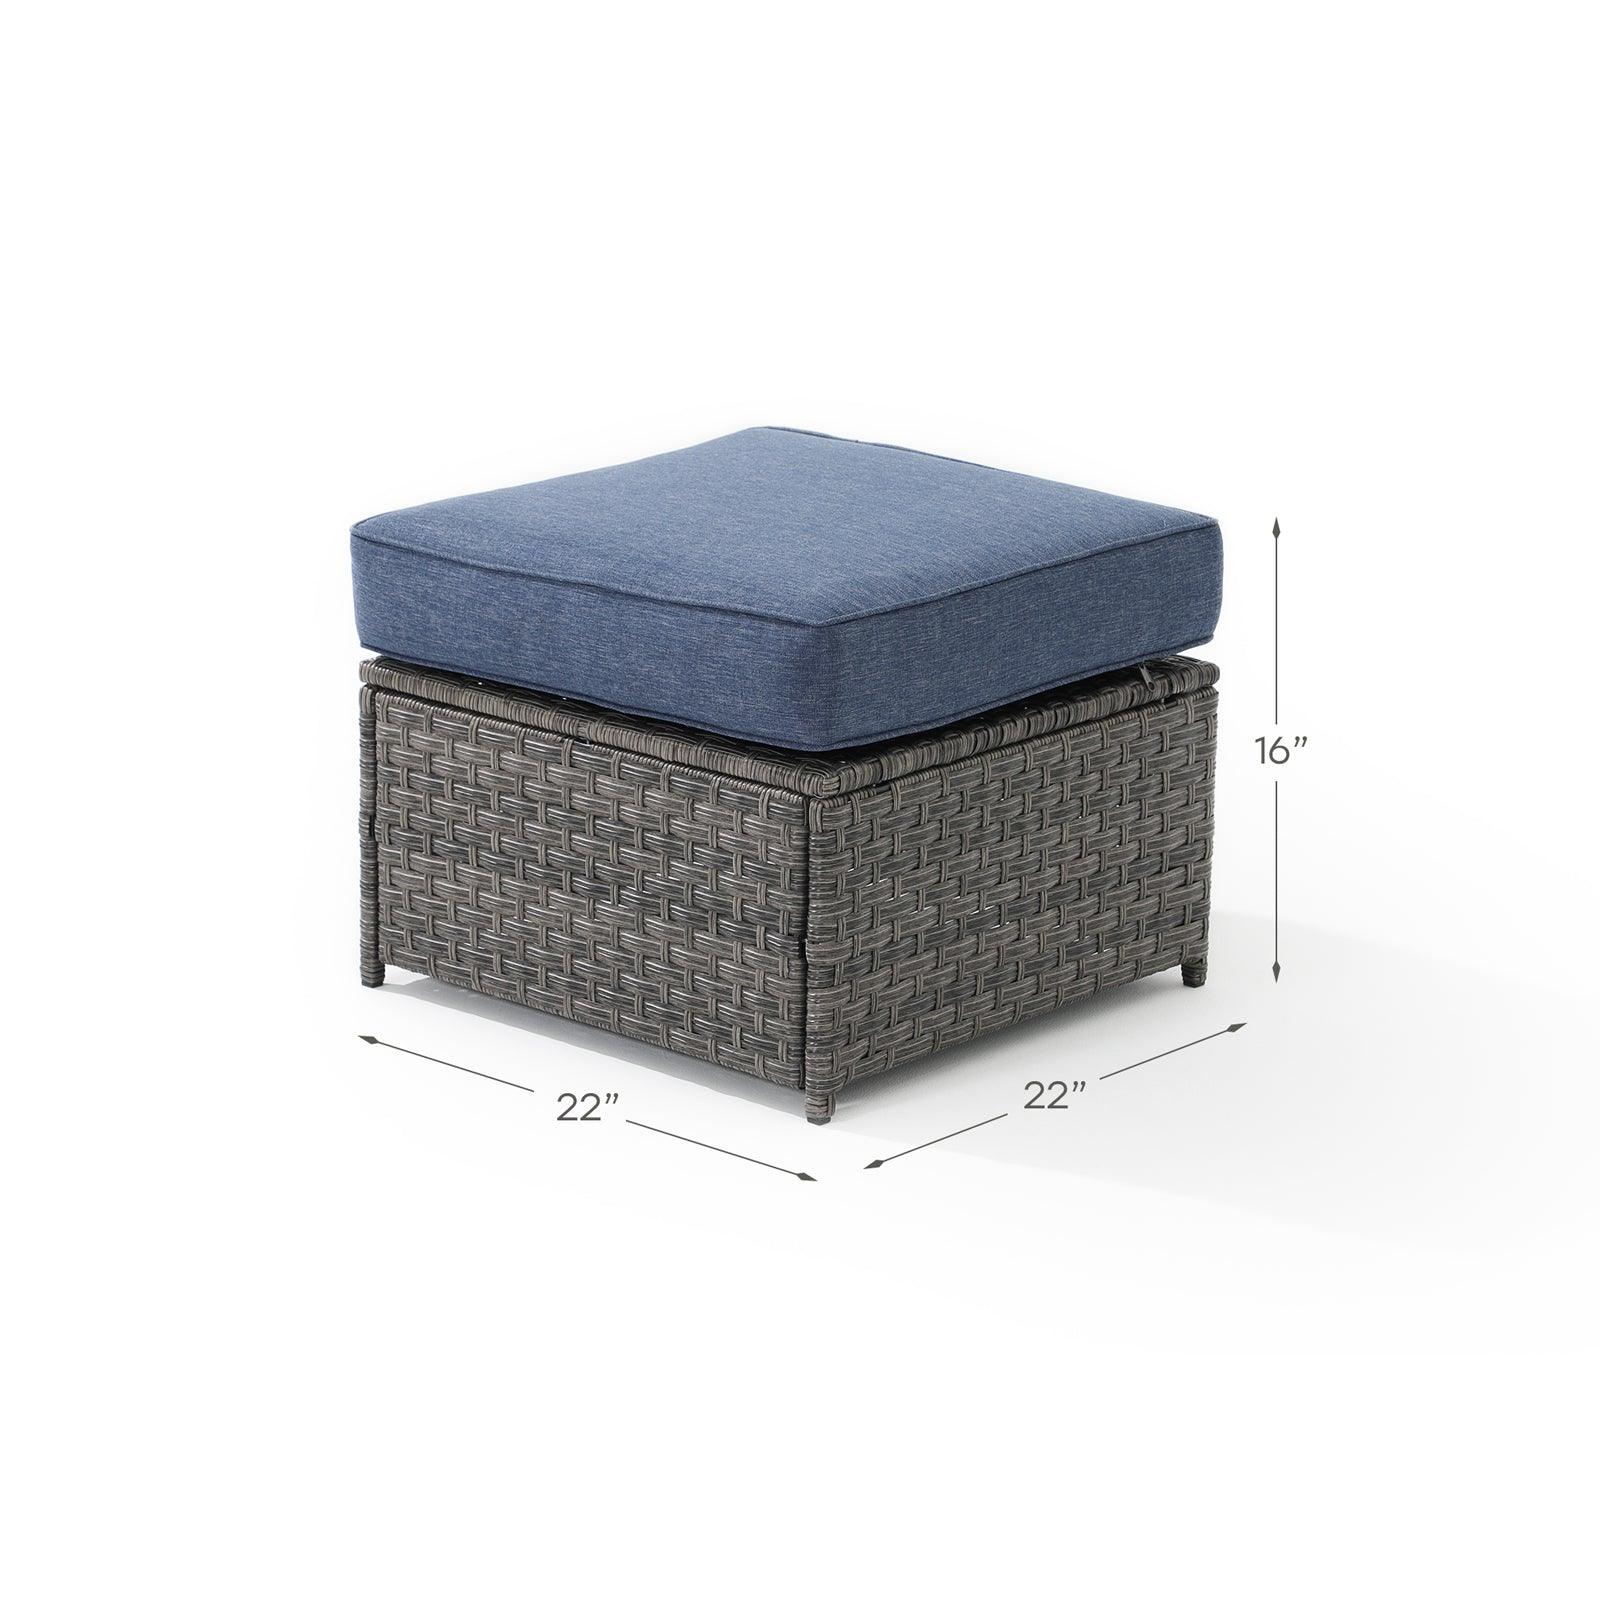 Ayia ottoman with grey rattan design, navy blue cushions, dimension information  - Jardina Furniture #color_Navy blue